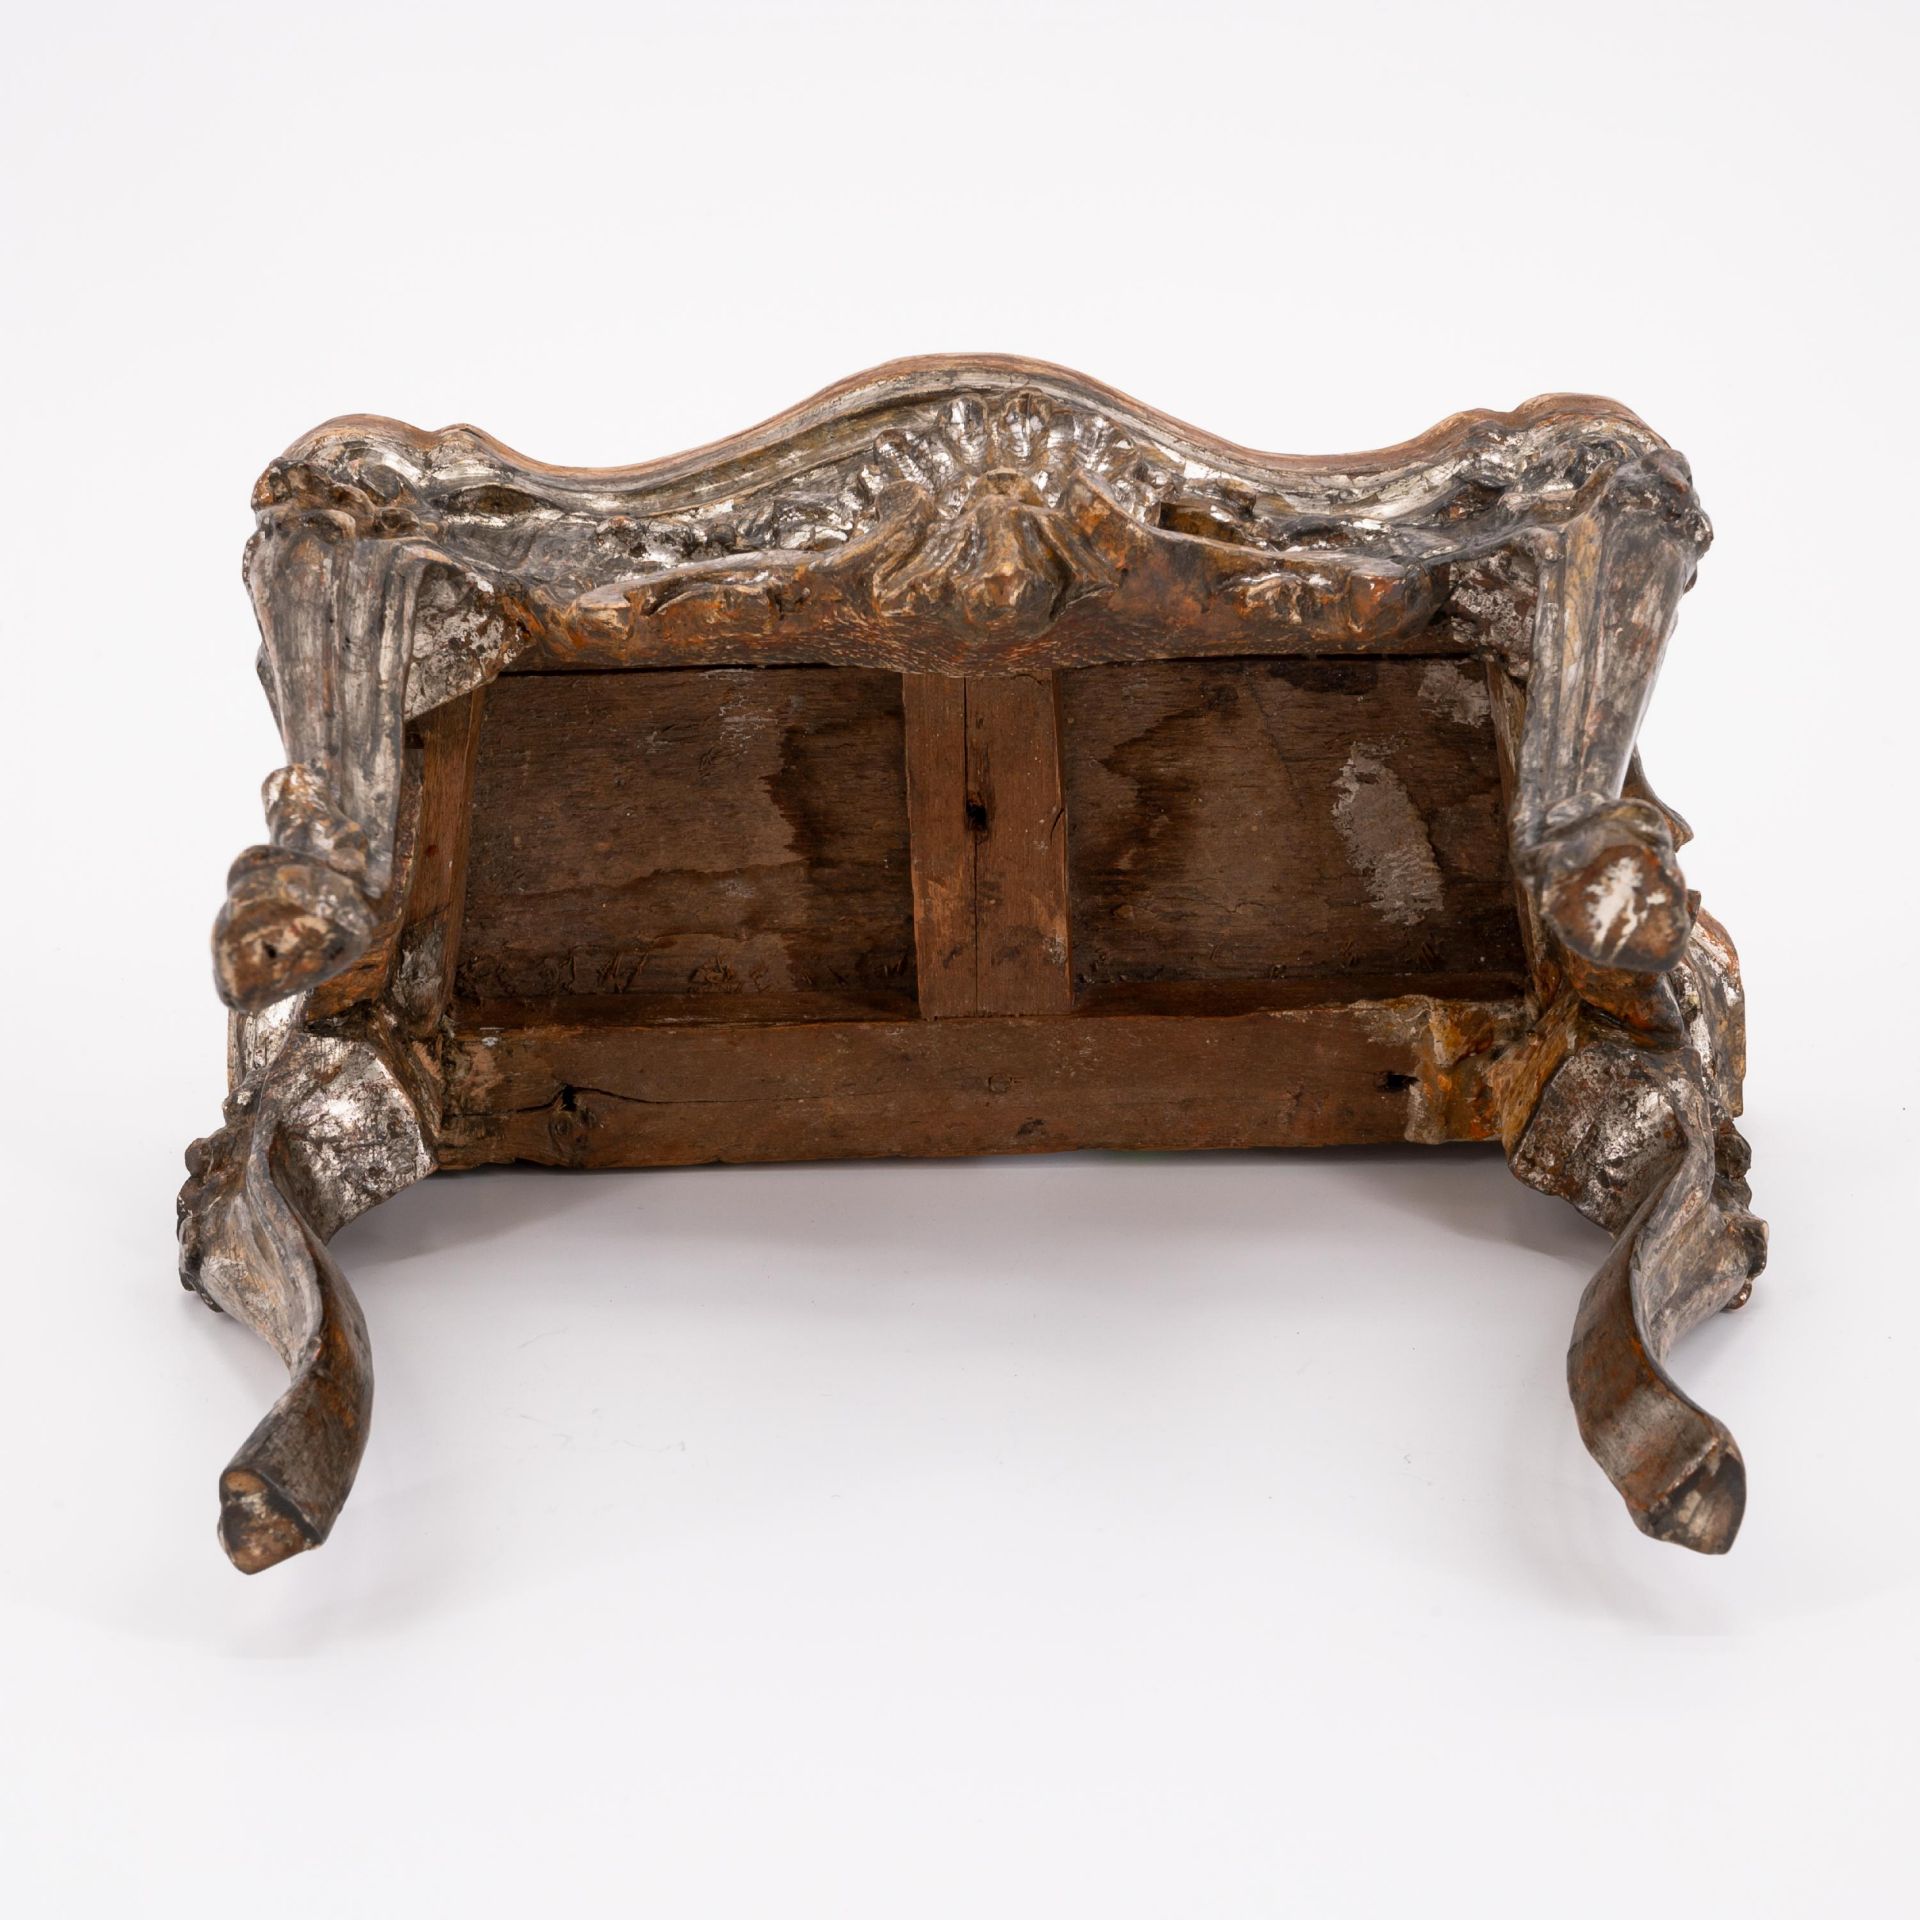 Venice: SMALL WOODEN MINIATURE CONSOLE TABLE WITH TROMPE L'OEUIL MARBLE PLATE - Image 6 of 6